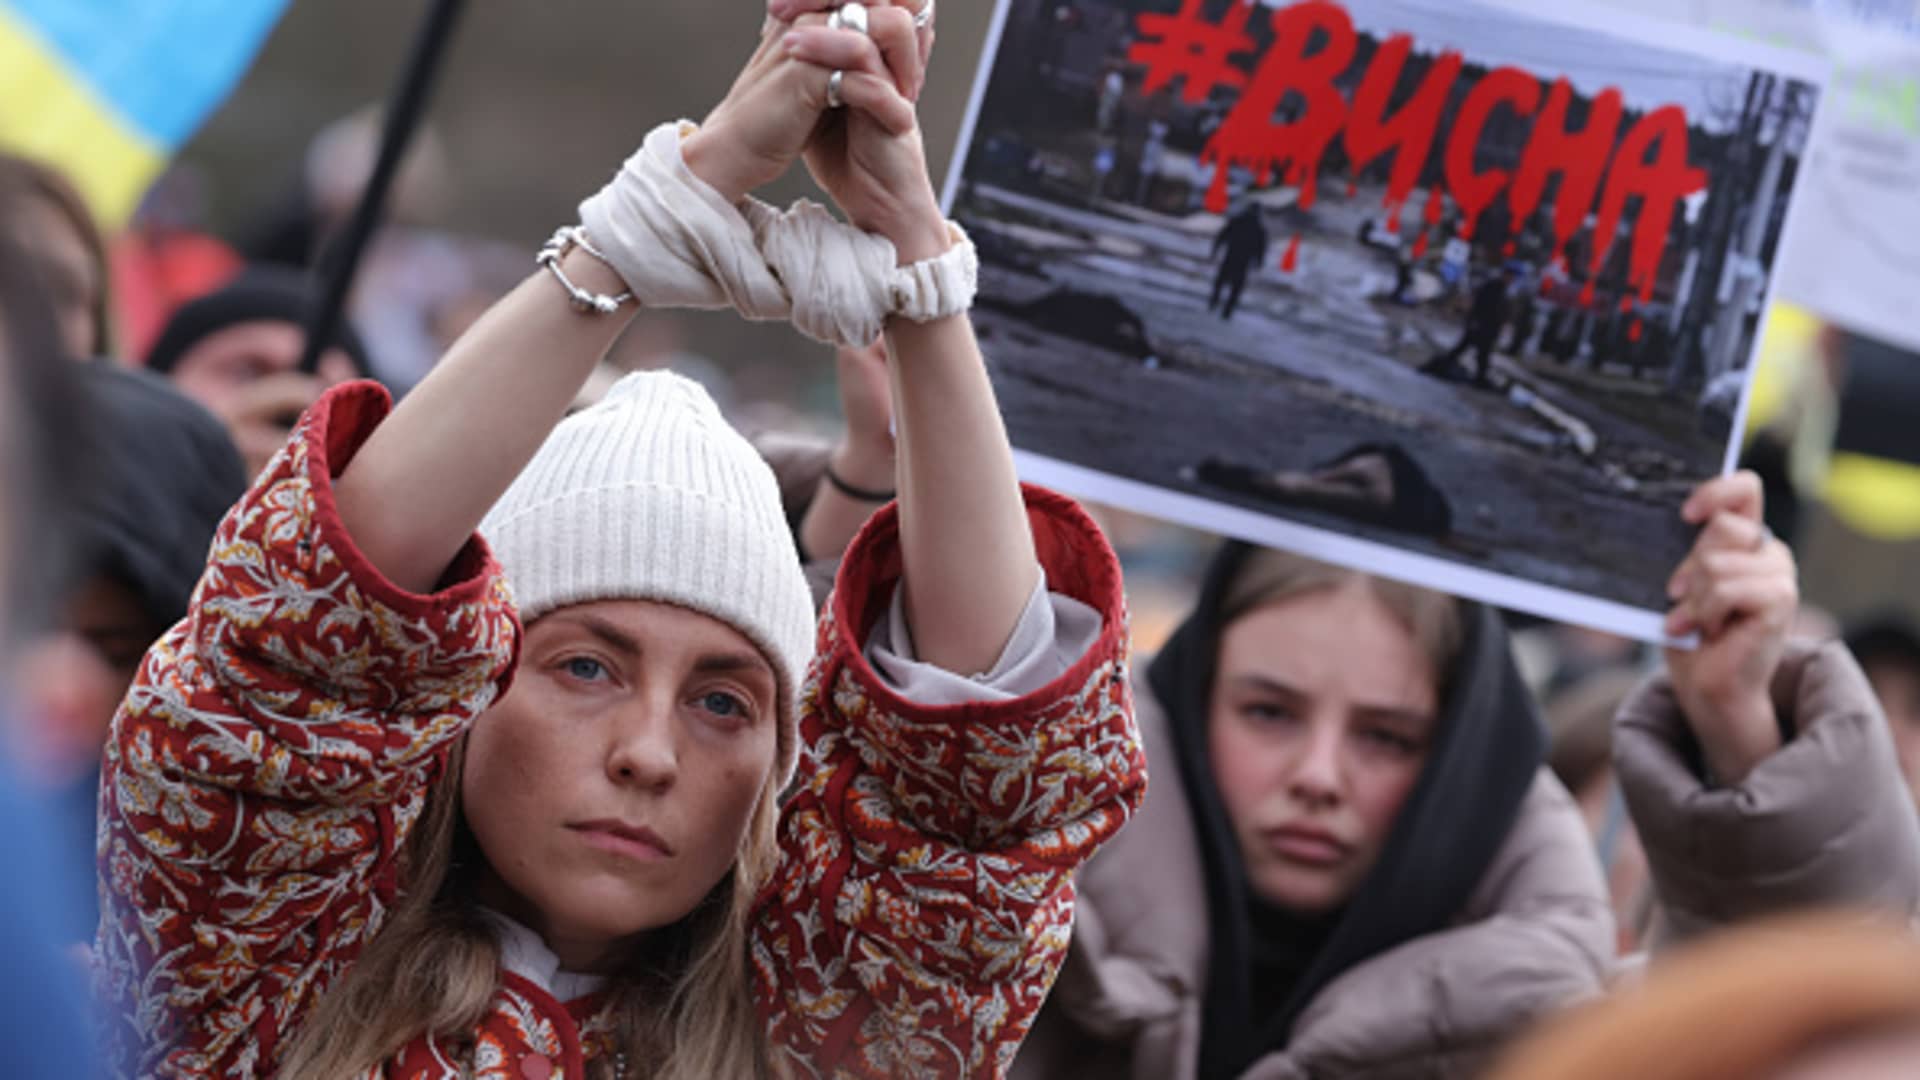 A protester holds up her hands symbolically bound in reference to the bound and murdered civilians of the Ukrainian town of Bucha near Kyiv during a demonstration against the Russian military invasion of Ukraine on April 06, 2022 in Berlin, Germany.